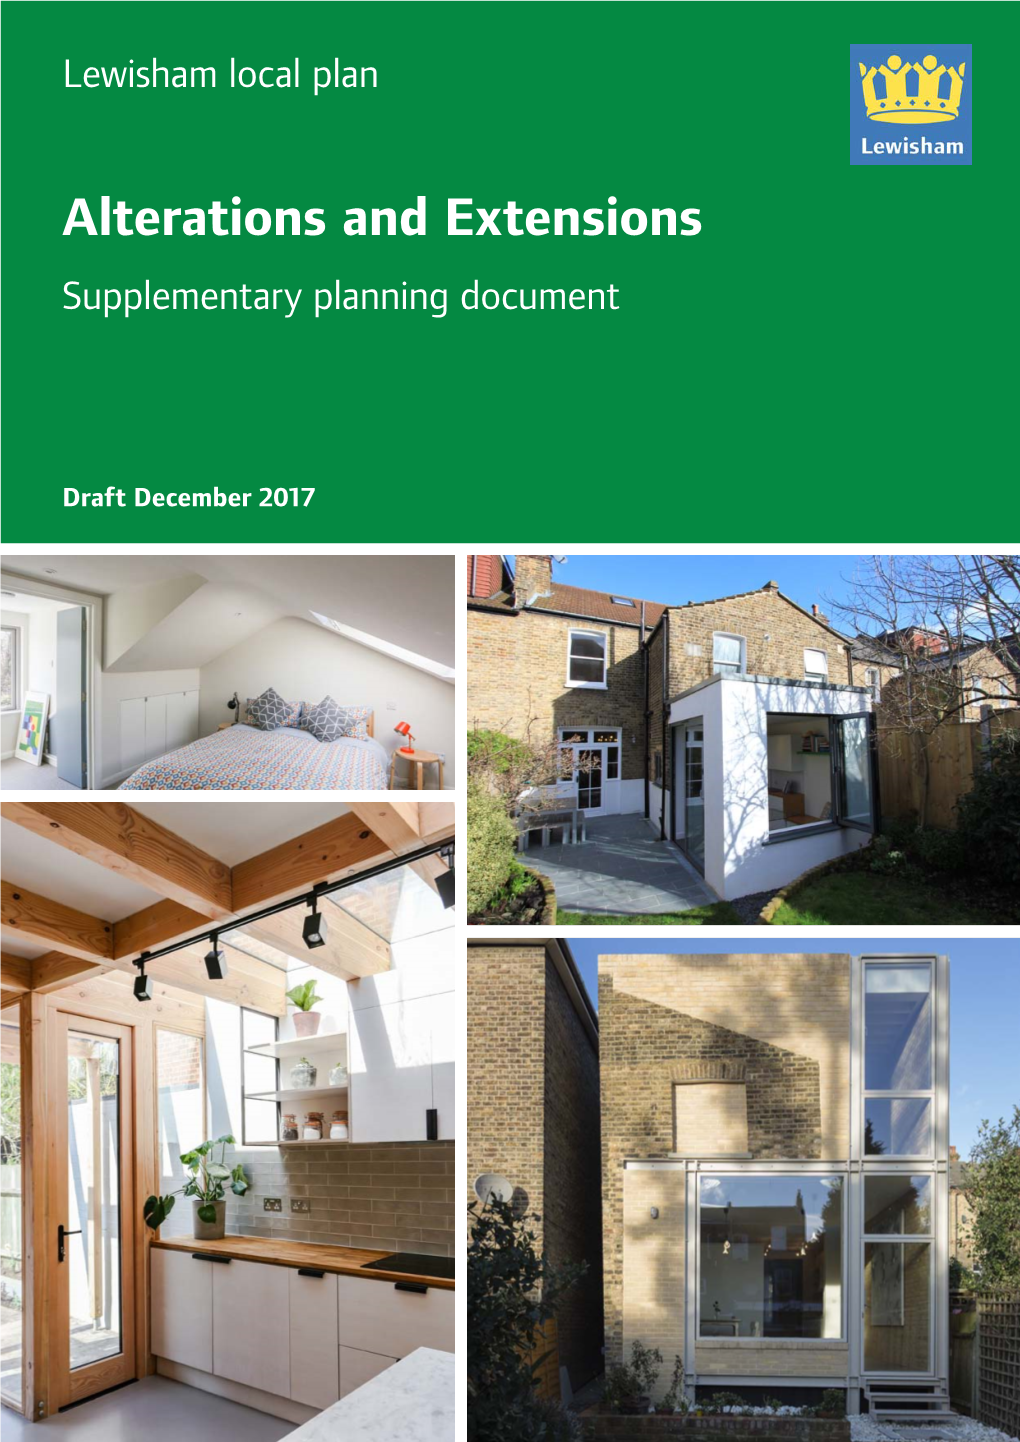 Alterations and Extensions Supplementary Planning Document